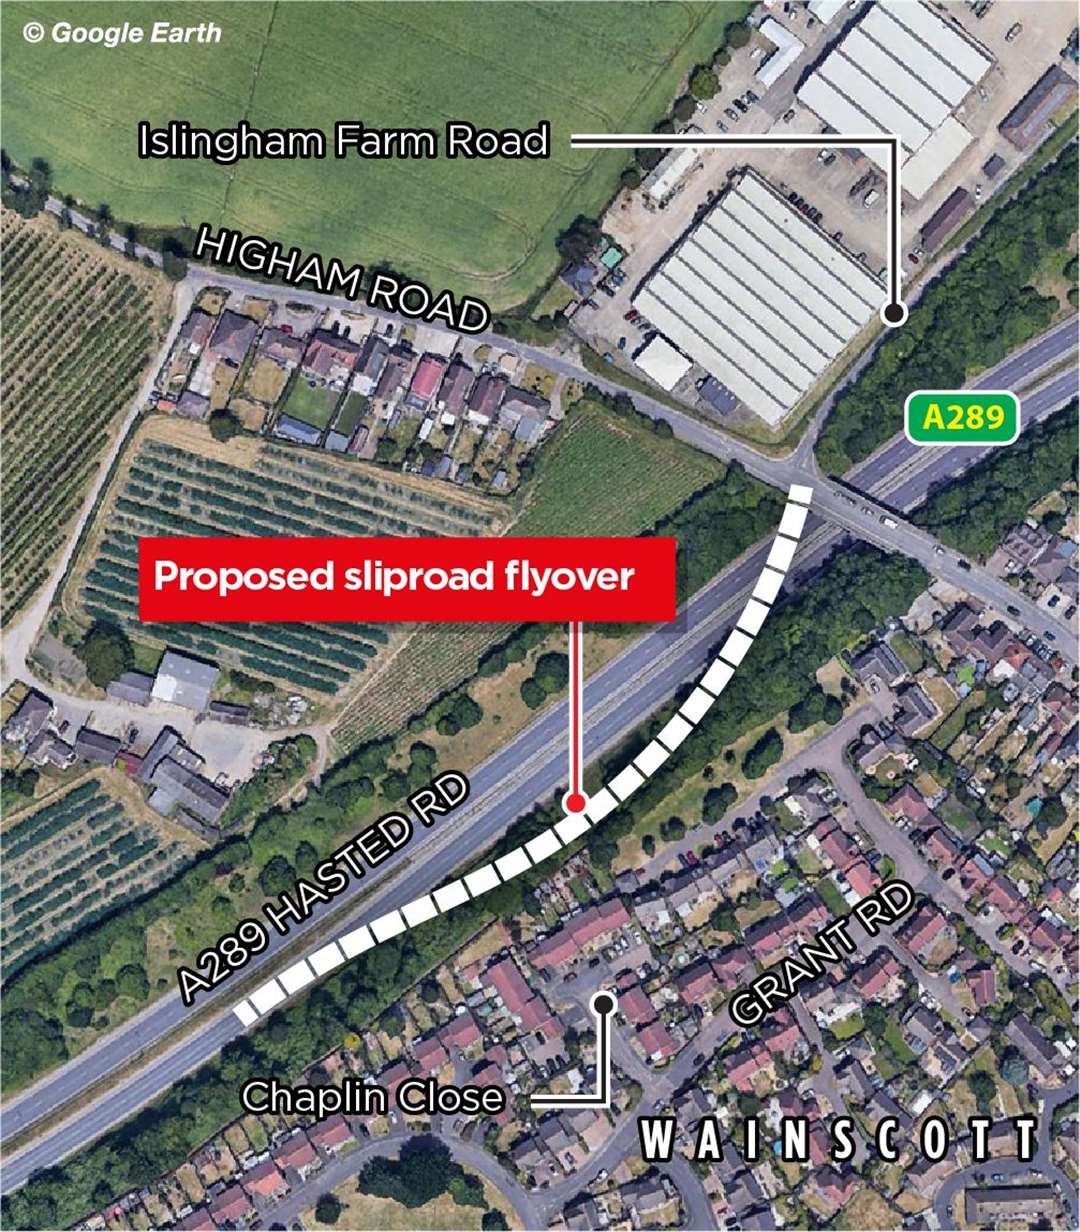 Proposed flyover at Wainscott